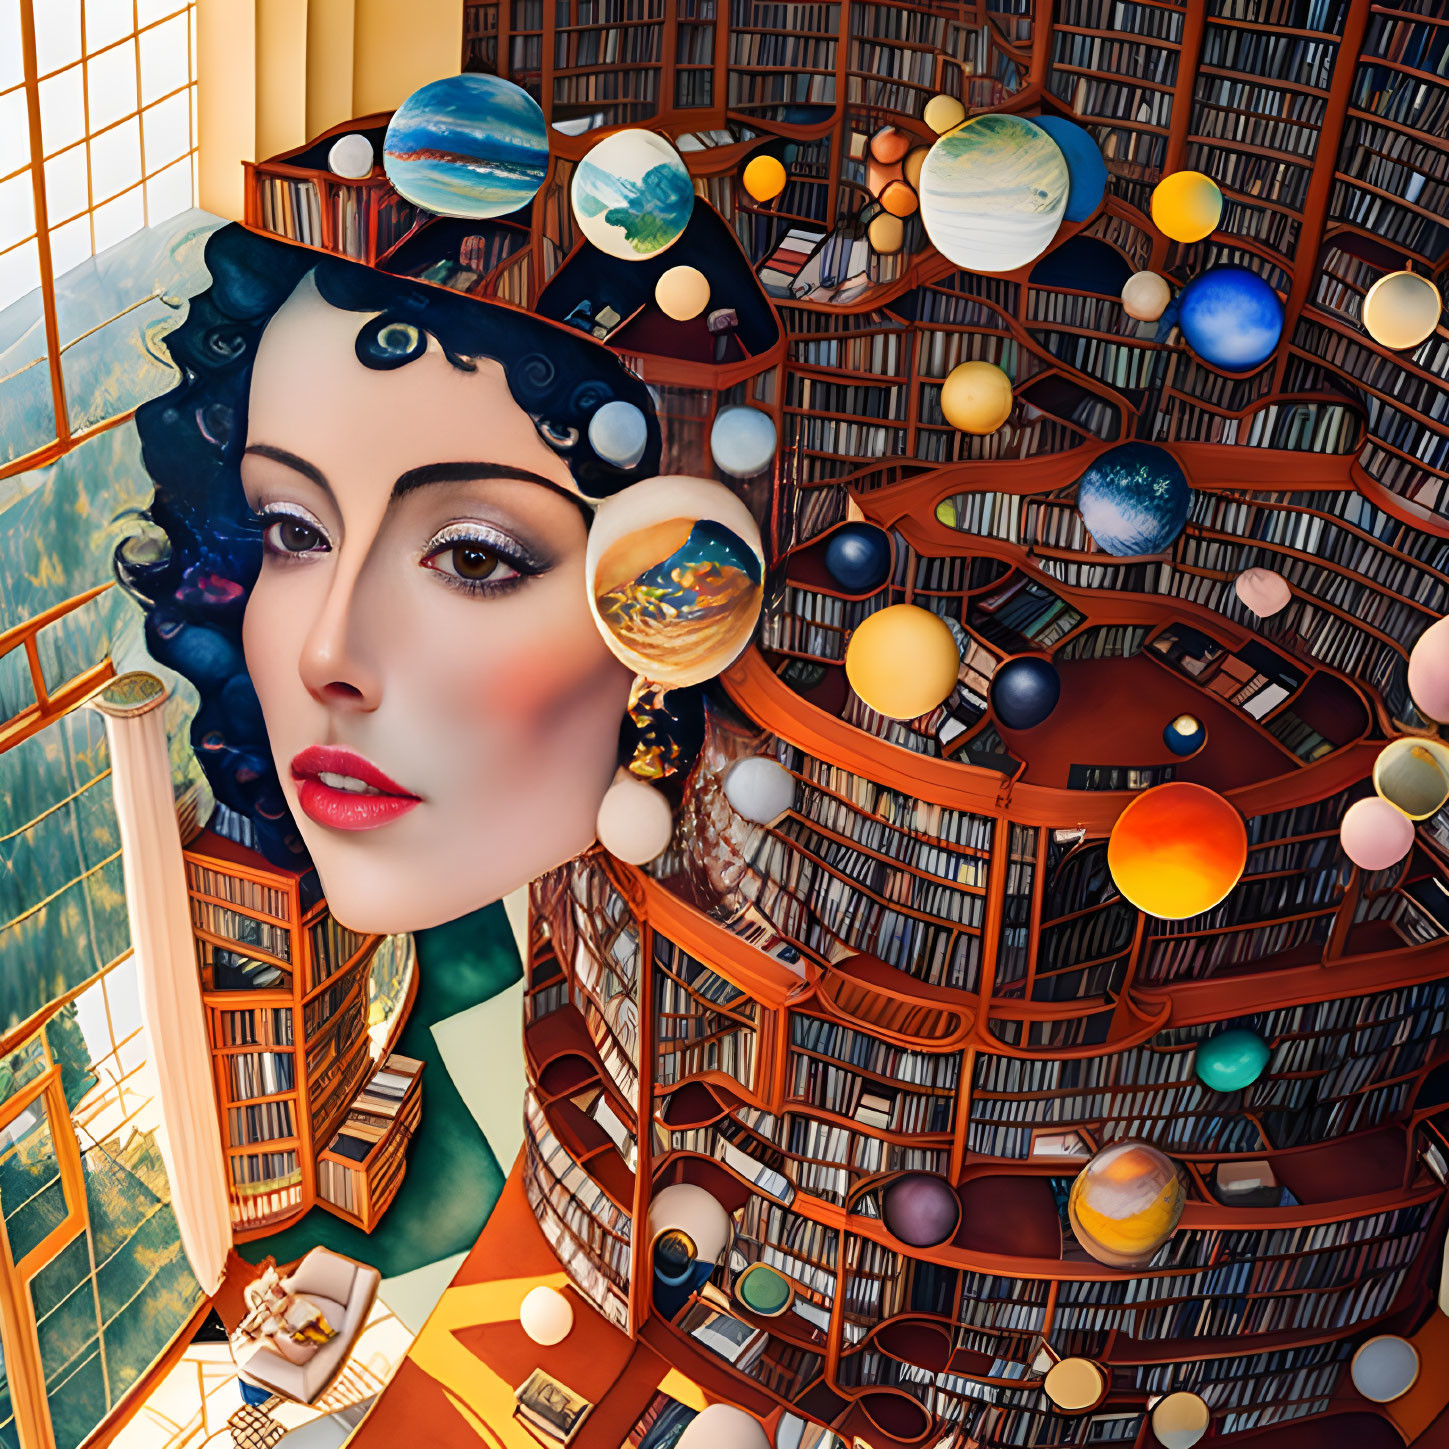 The Library in My Mind